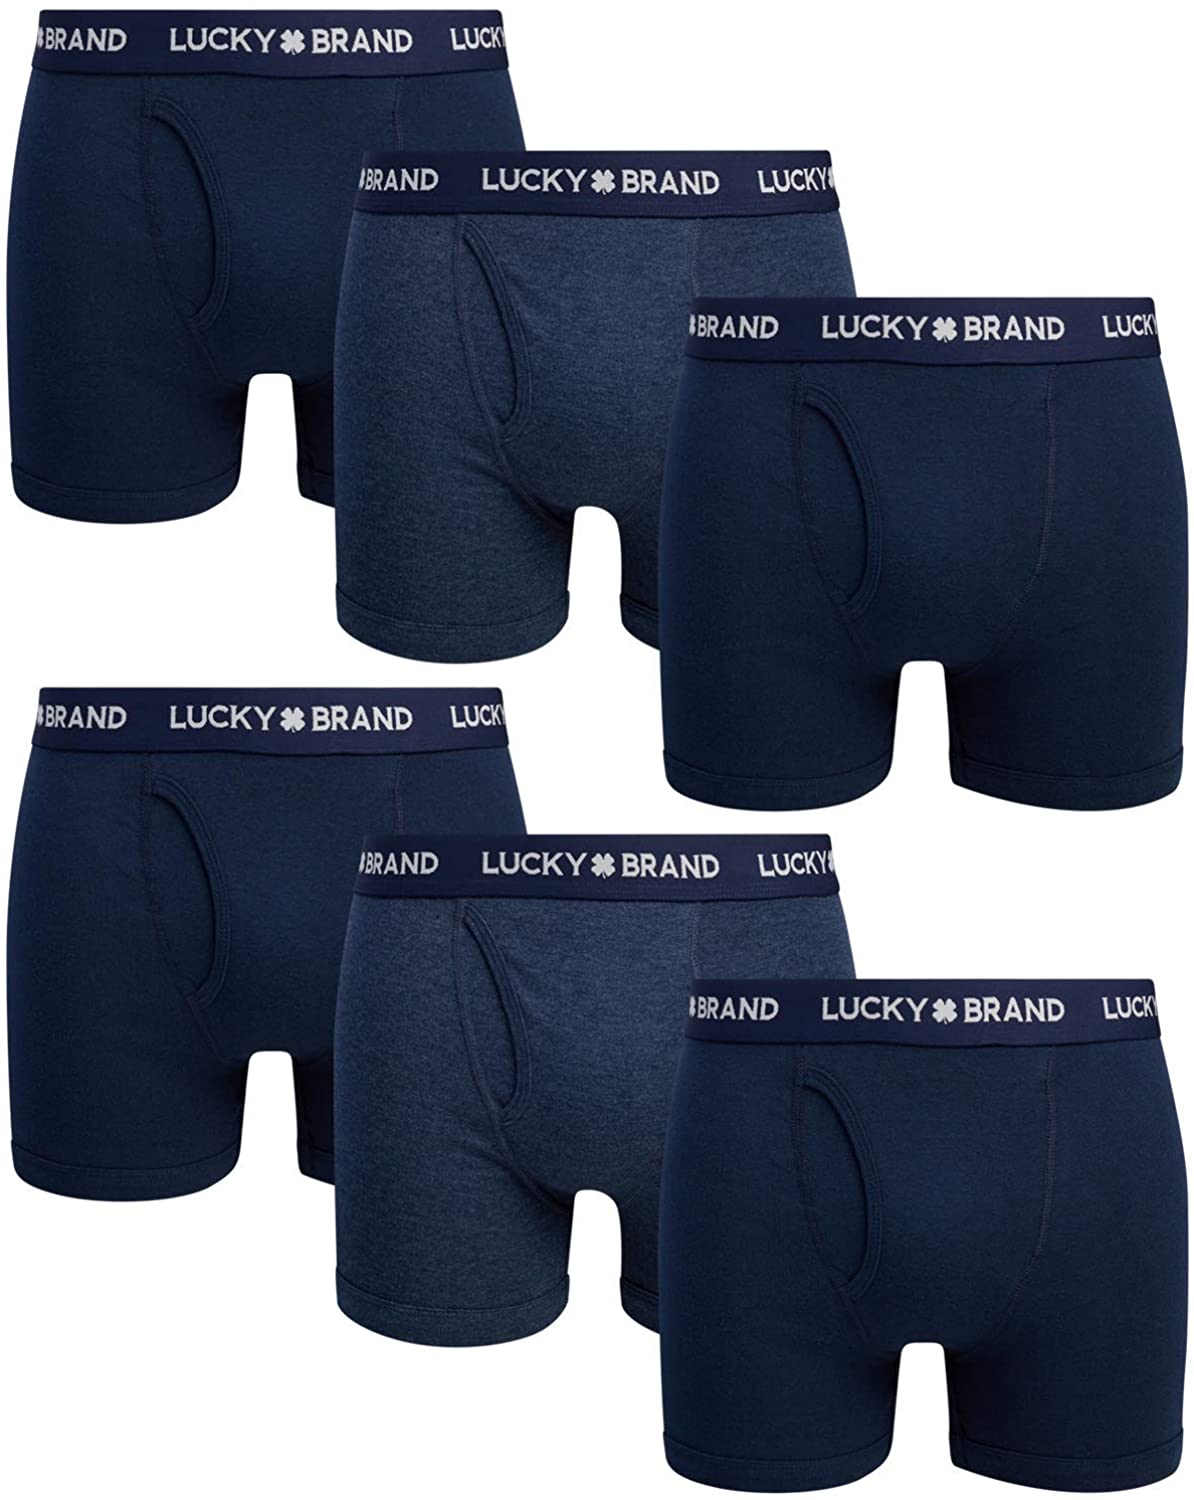 Lucky Brand Black Label Boxer Brief - Pack of 3